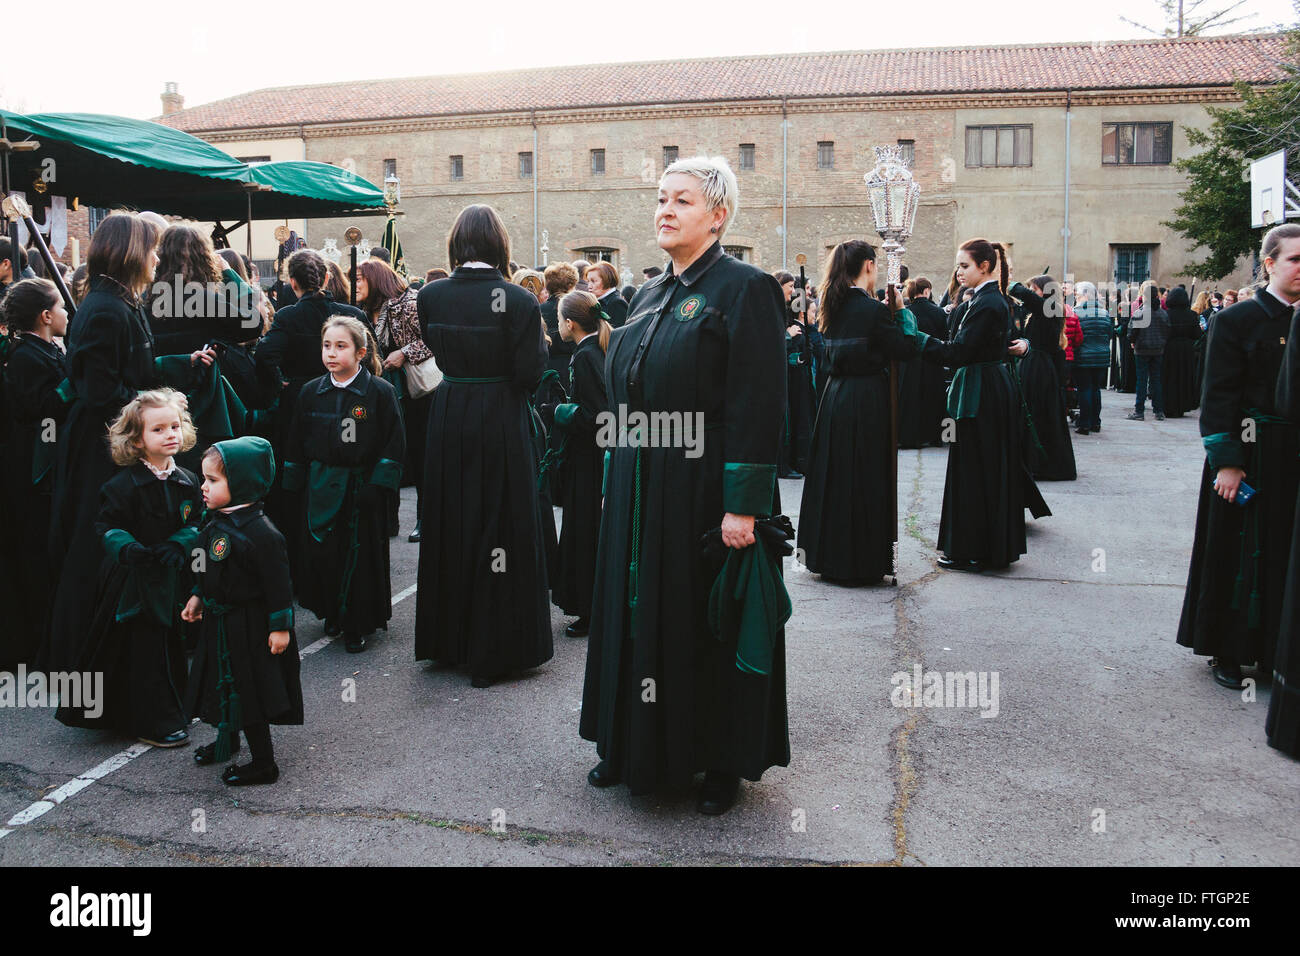 Female sisterhood during Holy Week in Spain. Woman standing in the middle in a mixed aged group. Stock Photo